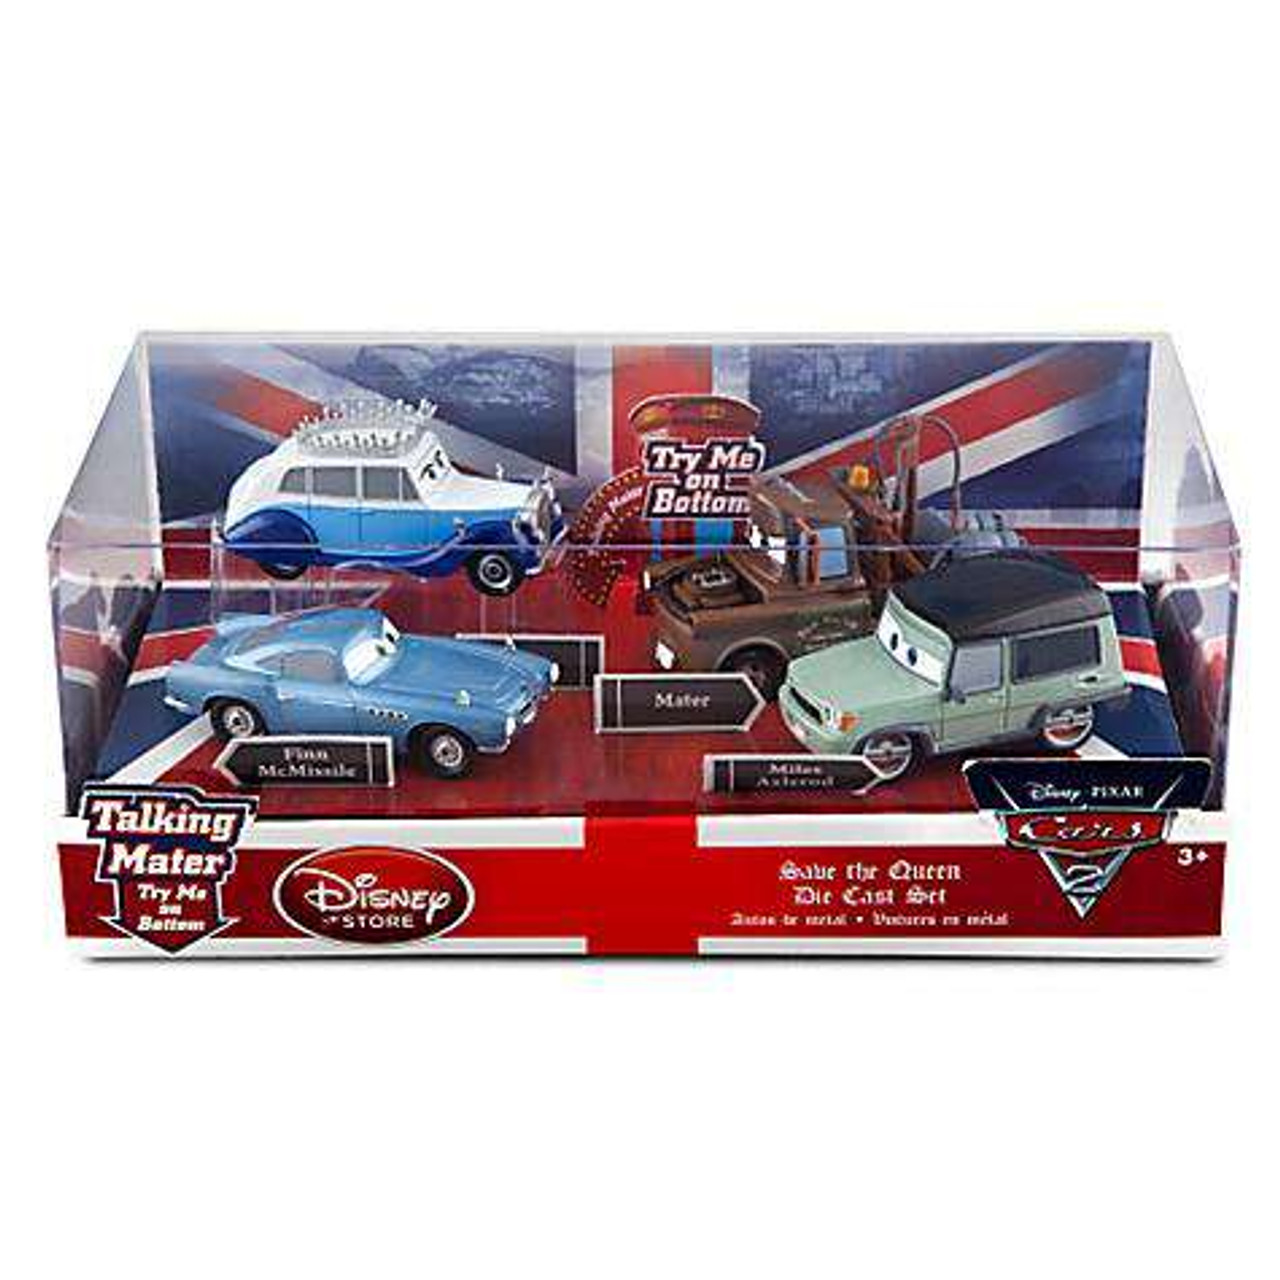 Disney Pixar Cars Cars 2 143 Multi Packs Save The Queen Exclusive 143 Diecast Car Set Damaged Package Toywiz